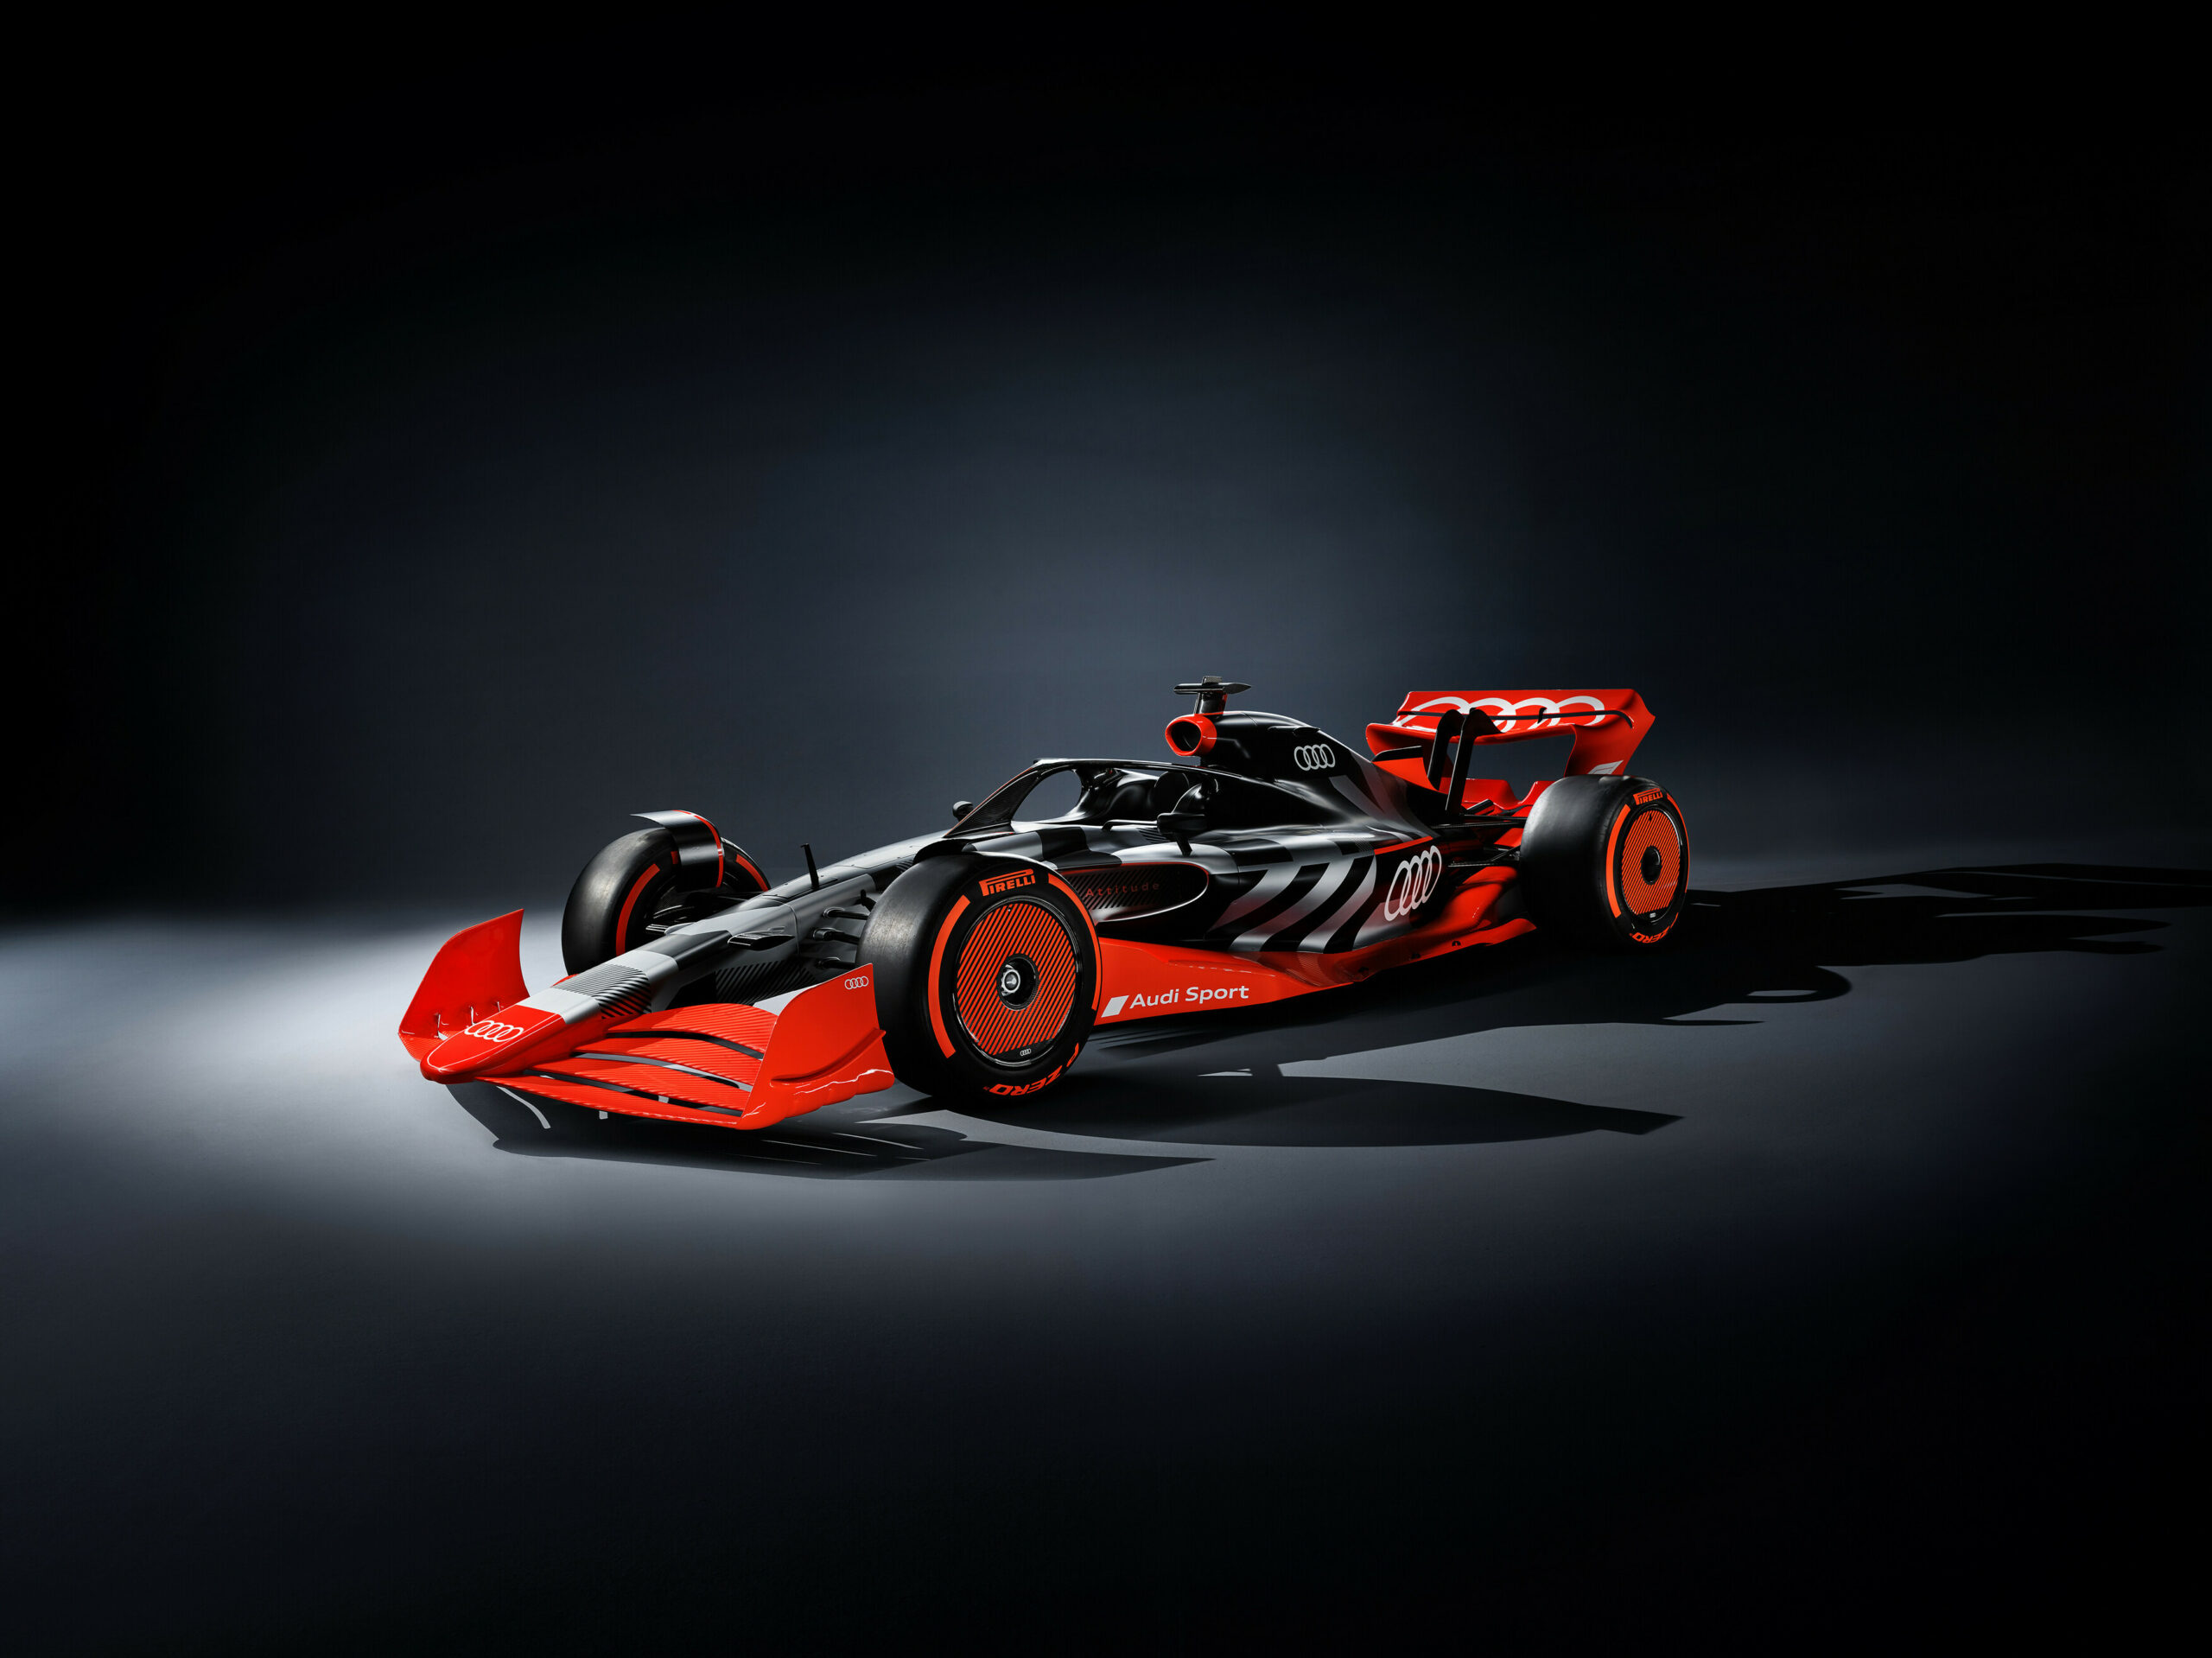 Showcar with Audi F1 launch livery Audi Blog